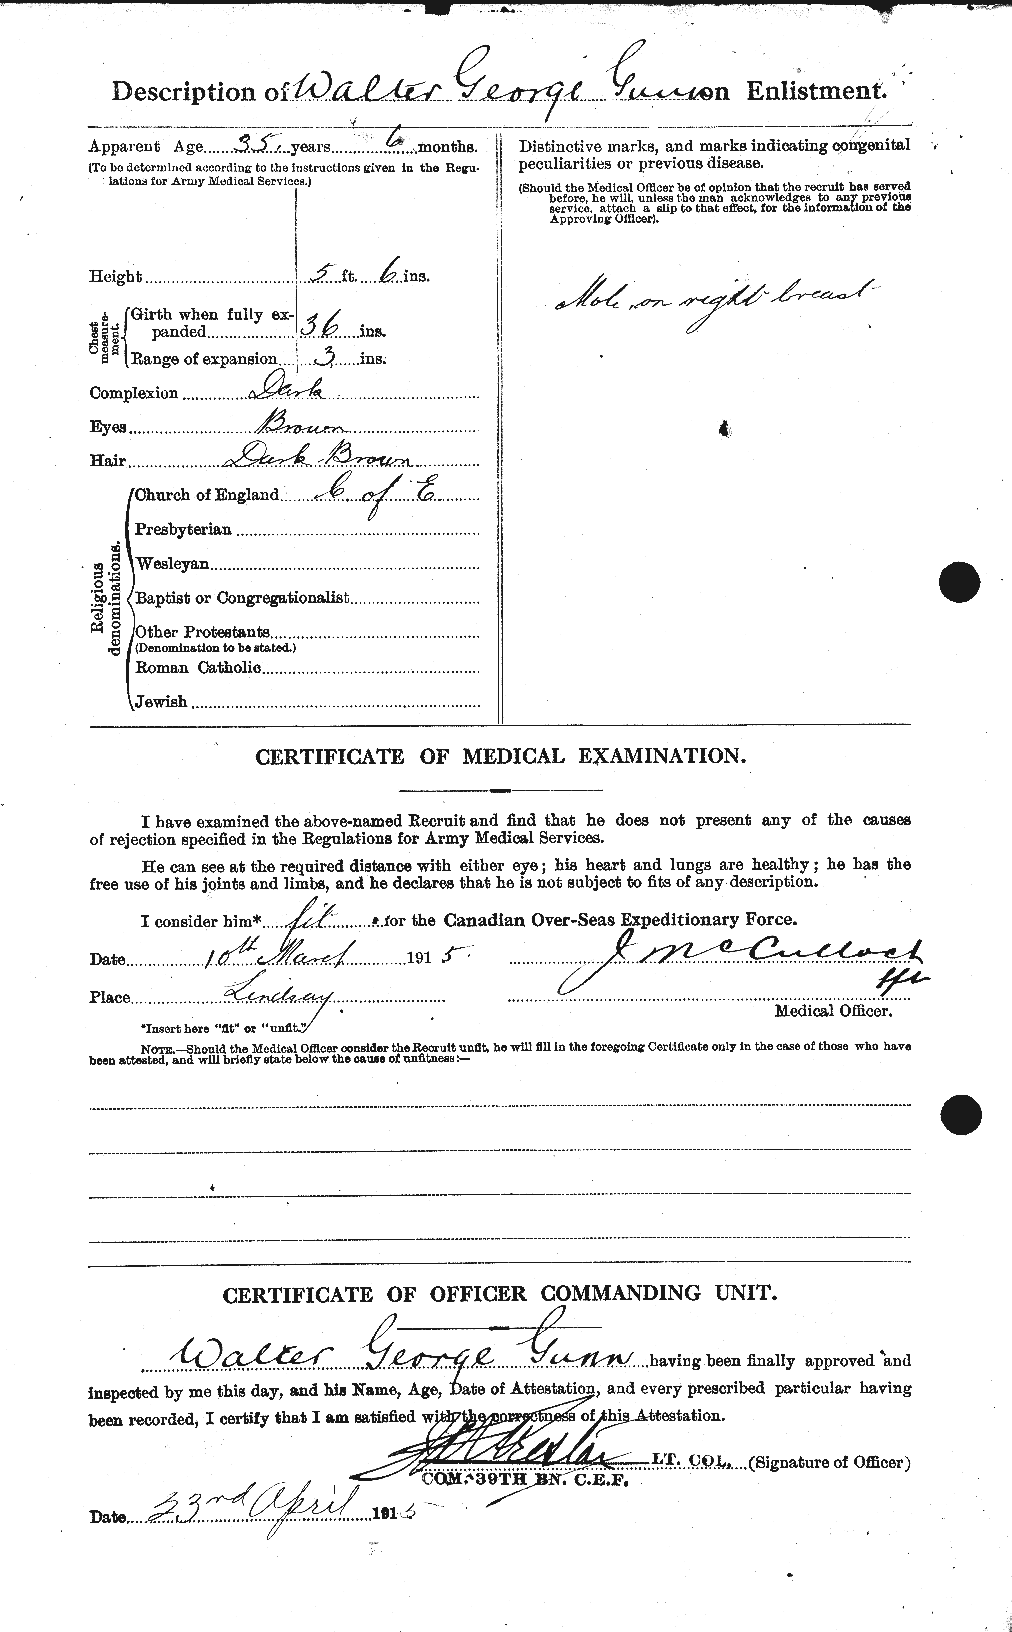 Personnel Records of the First World War - CEF 369345b